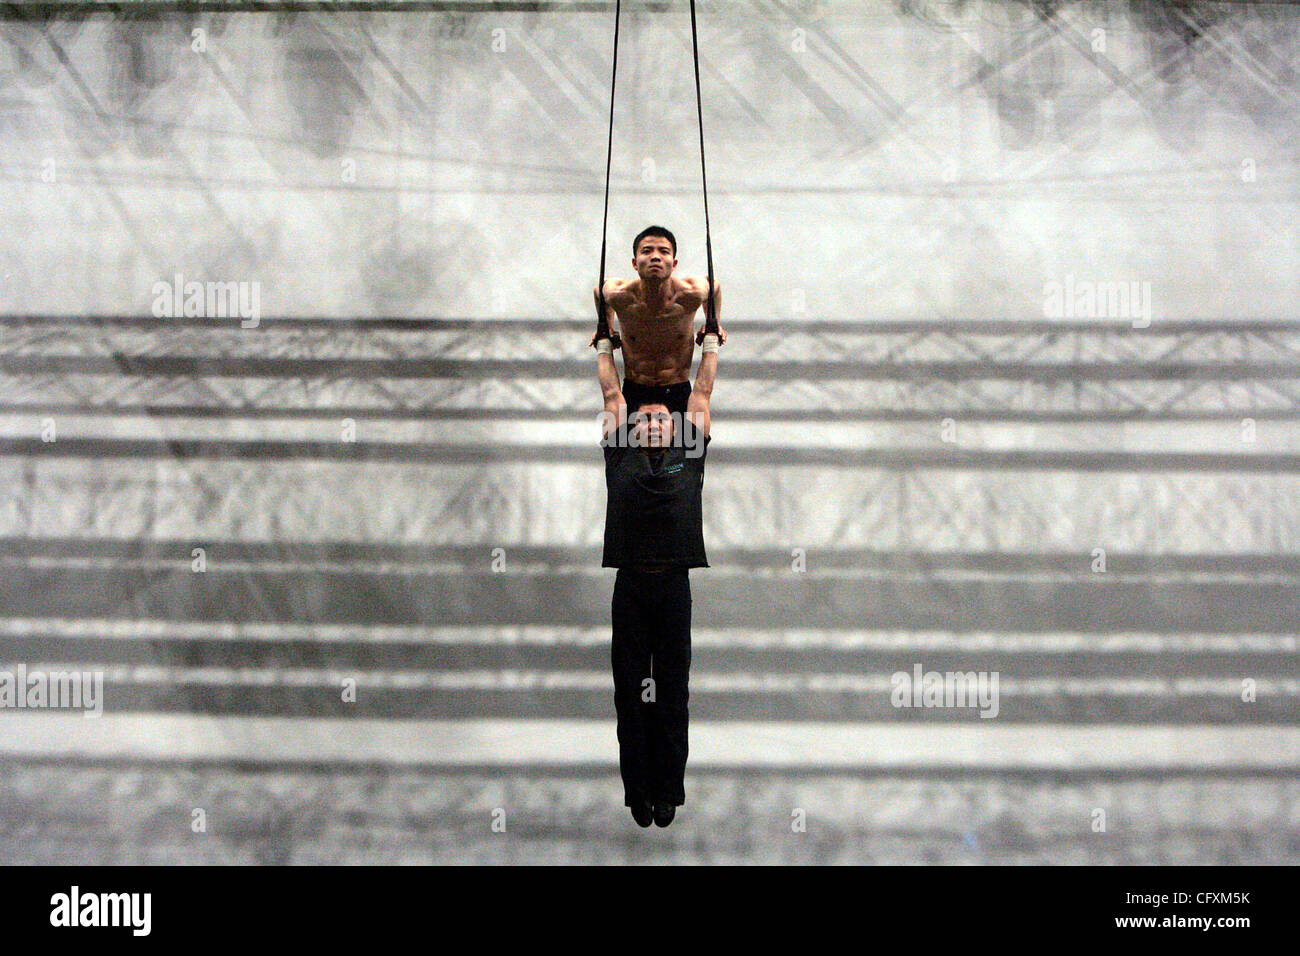 Apr 19, 2007 - San Antonio, TX, USA - RUI LING, top, and MING FANG rehearse for Delirium, a Cirque Du Soleil live music concert at the AT&T Center in San Antonio on Thursday, April 19, 2007. (Credit Image: © Lisa Krantz/San Antonio Express-News/ZUMA Press) RESTRICTIONS: US Tabloid RIGHTS OUT! SAN AN Stock Photo